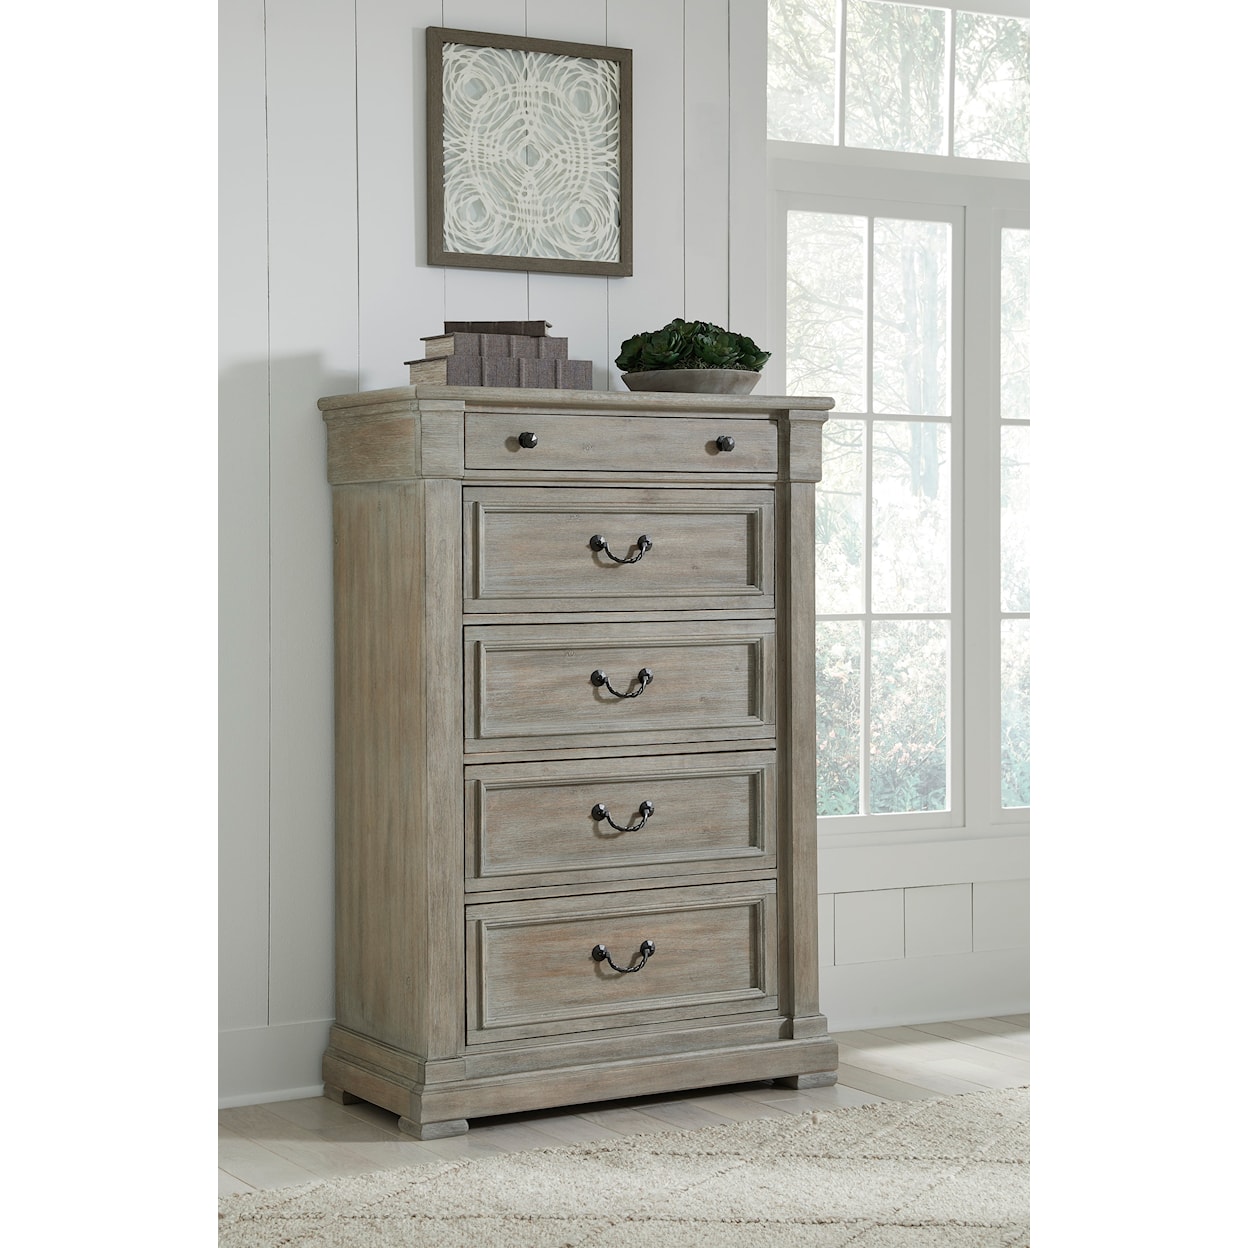 Signature Moreshire Chest of Drawers